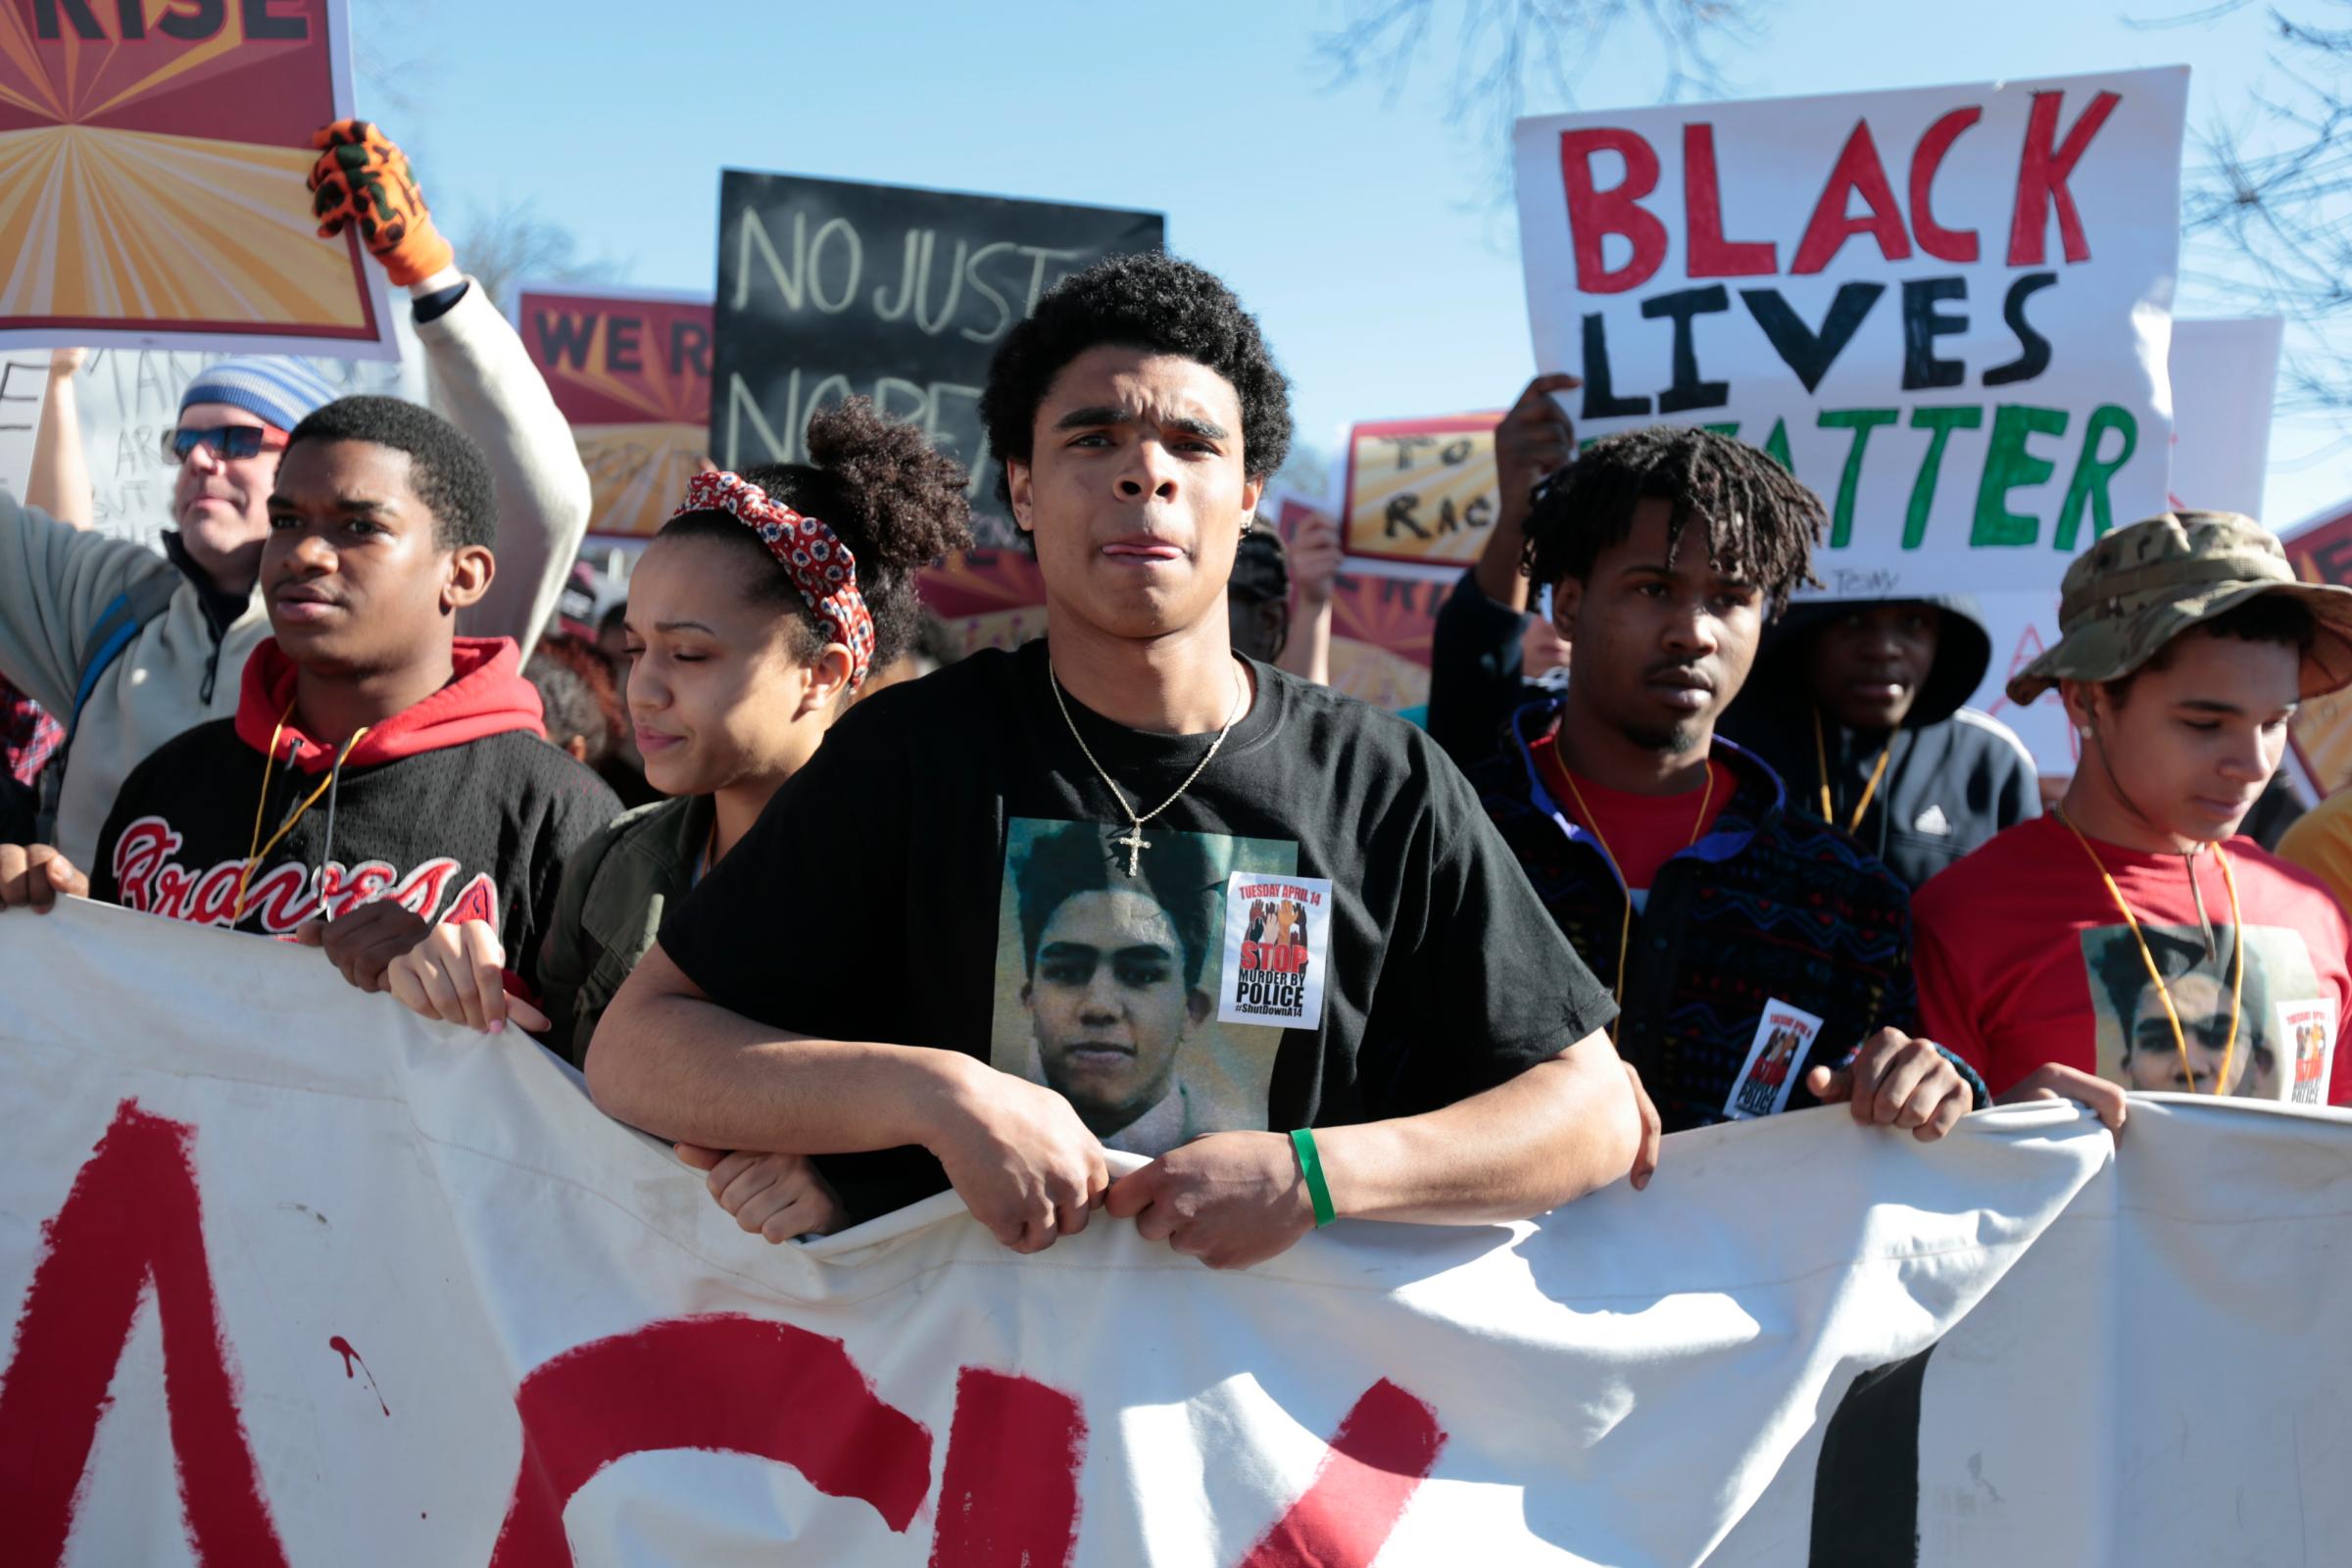 Demonstrators prepare to march in protest against the fatal police shooting of Tony Robinson in Madison, Wis. on March 11, 2015.